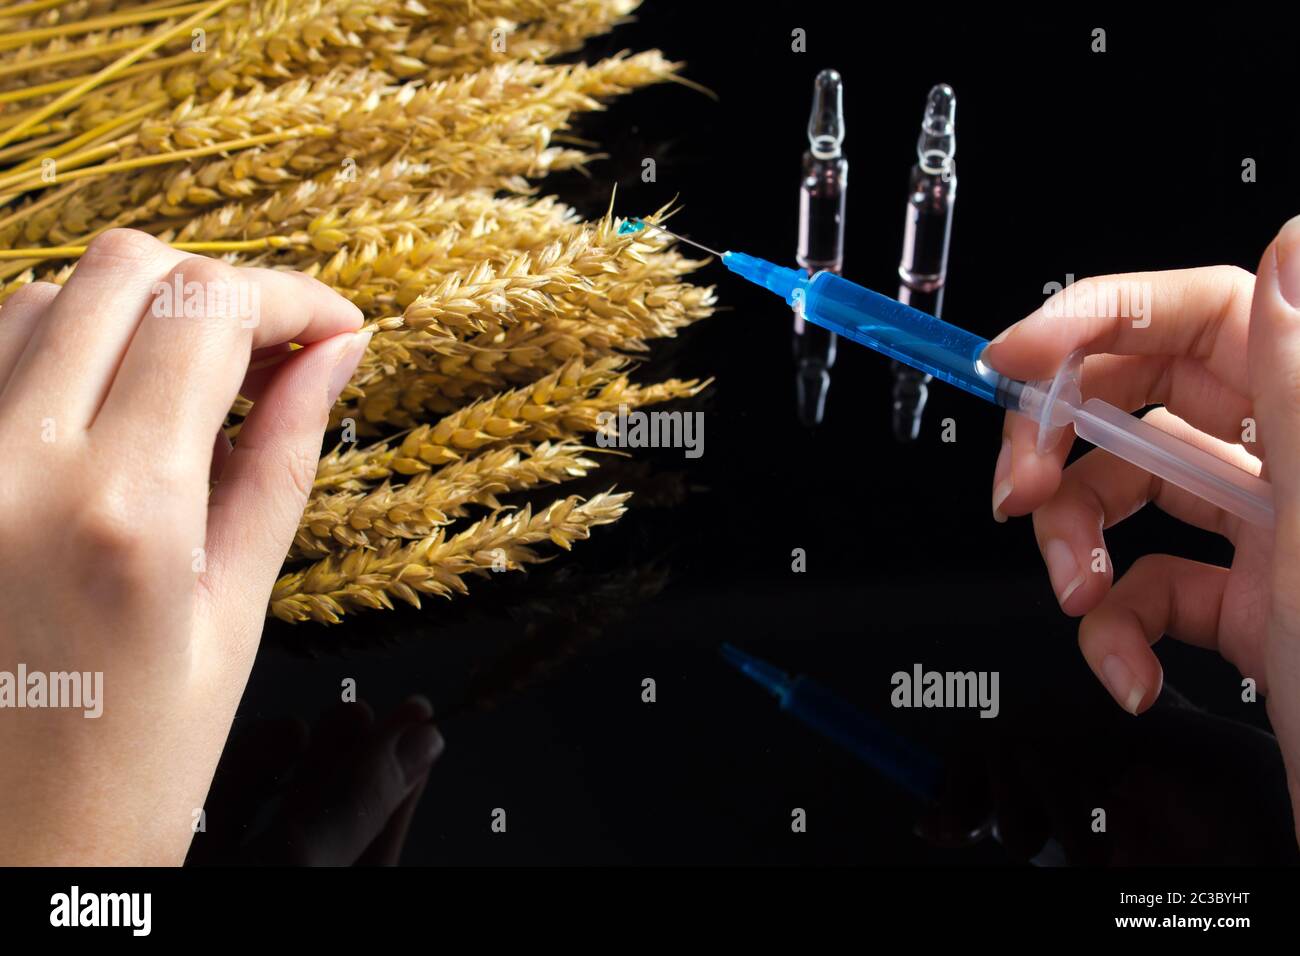 The harm of herbicides and pesticides on the human body. A syringe with a chemical substance and ampoules lie on a table with ears of wheat. Wheat and Stock Photo